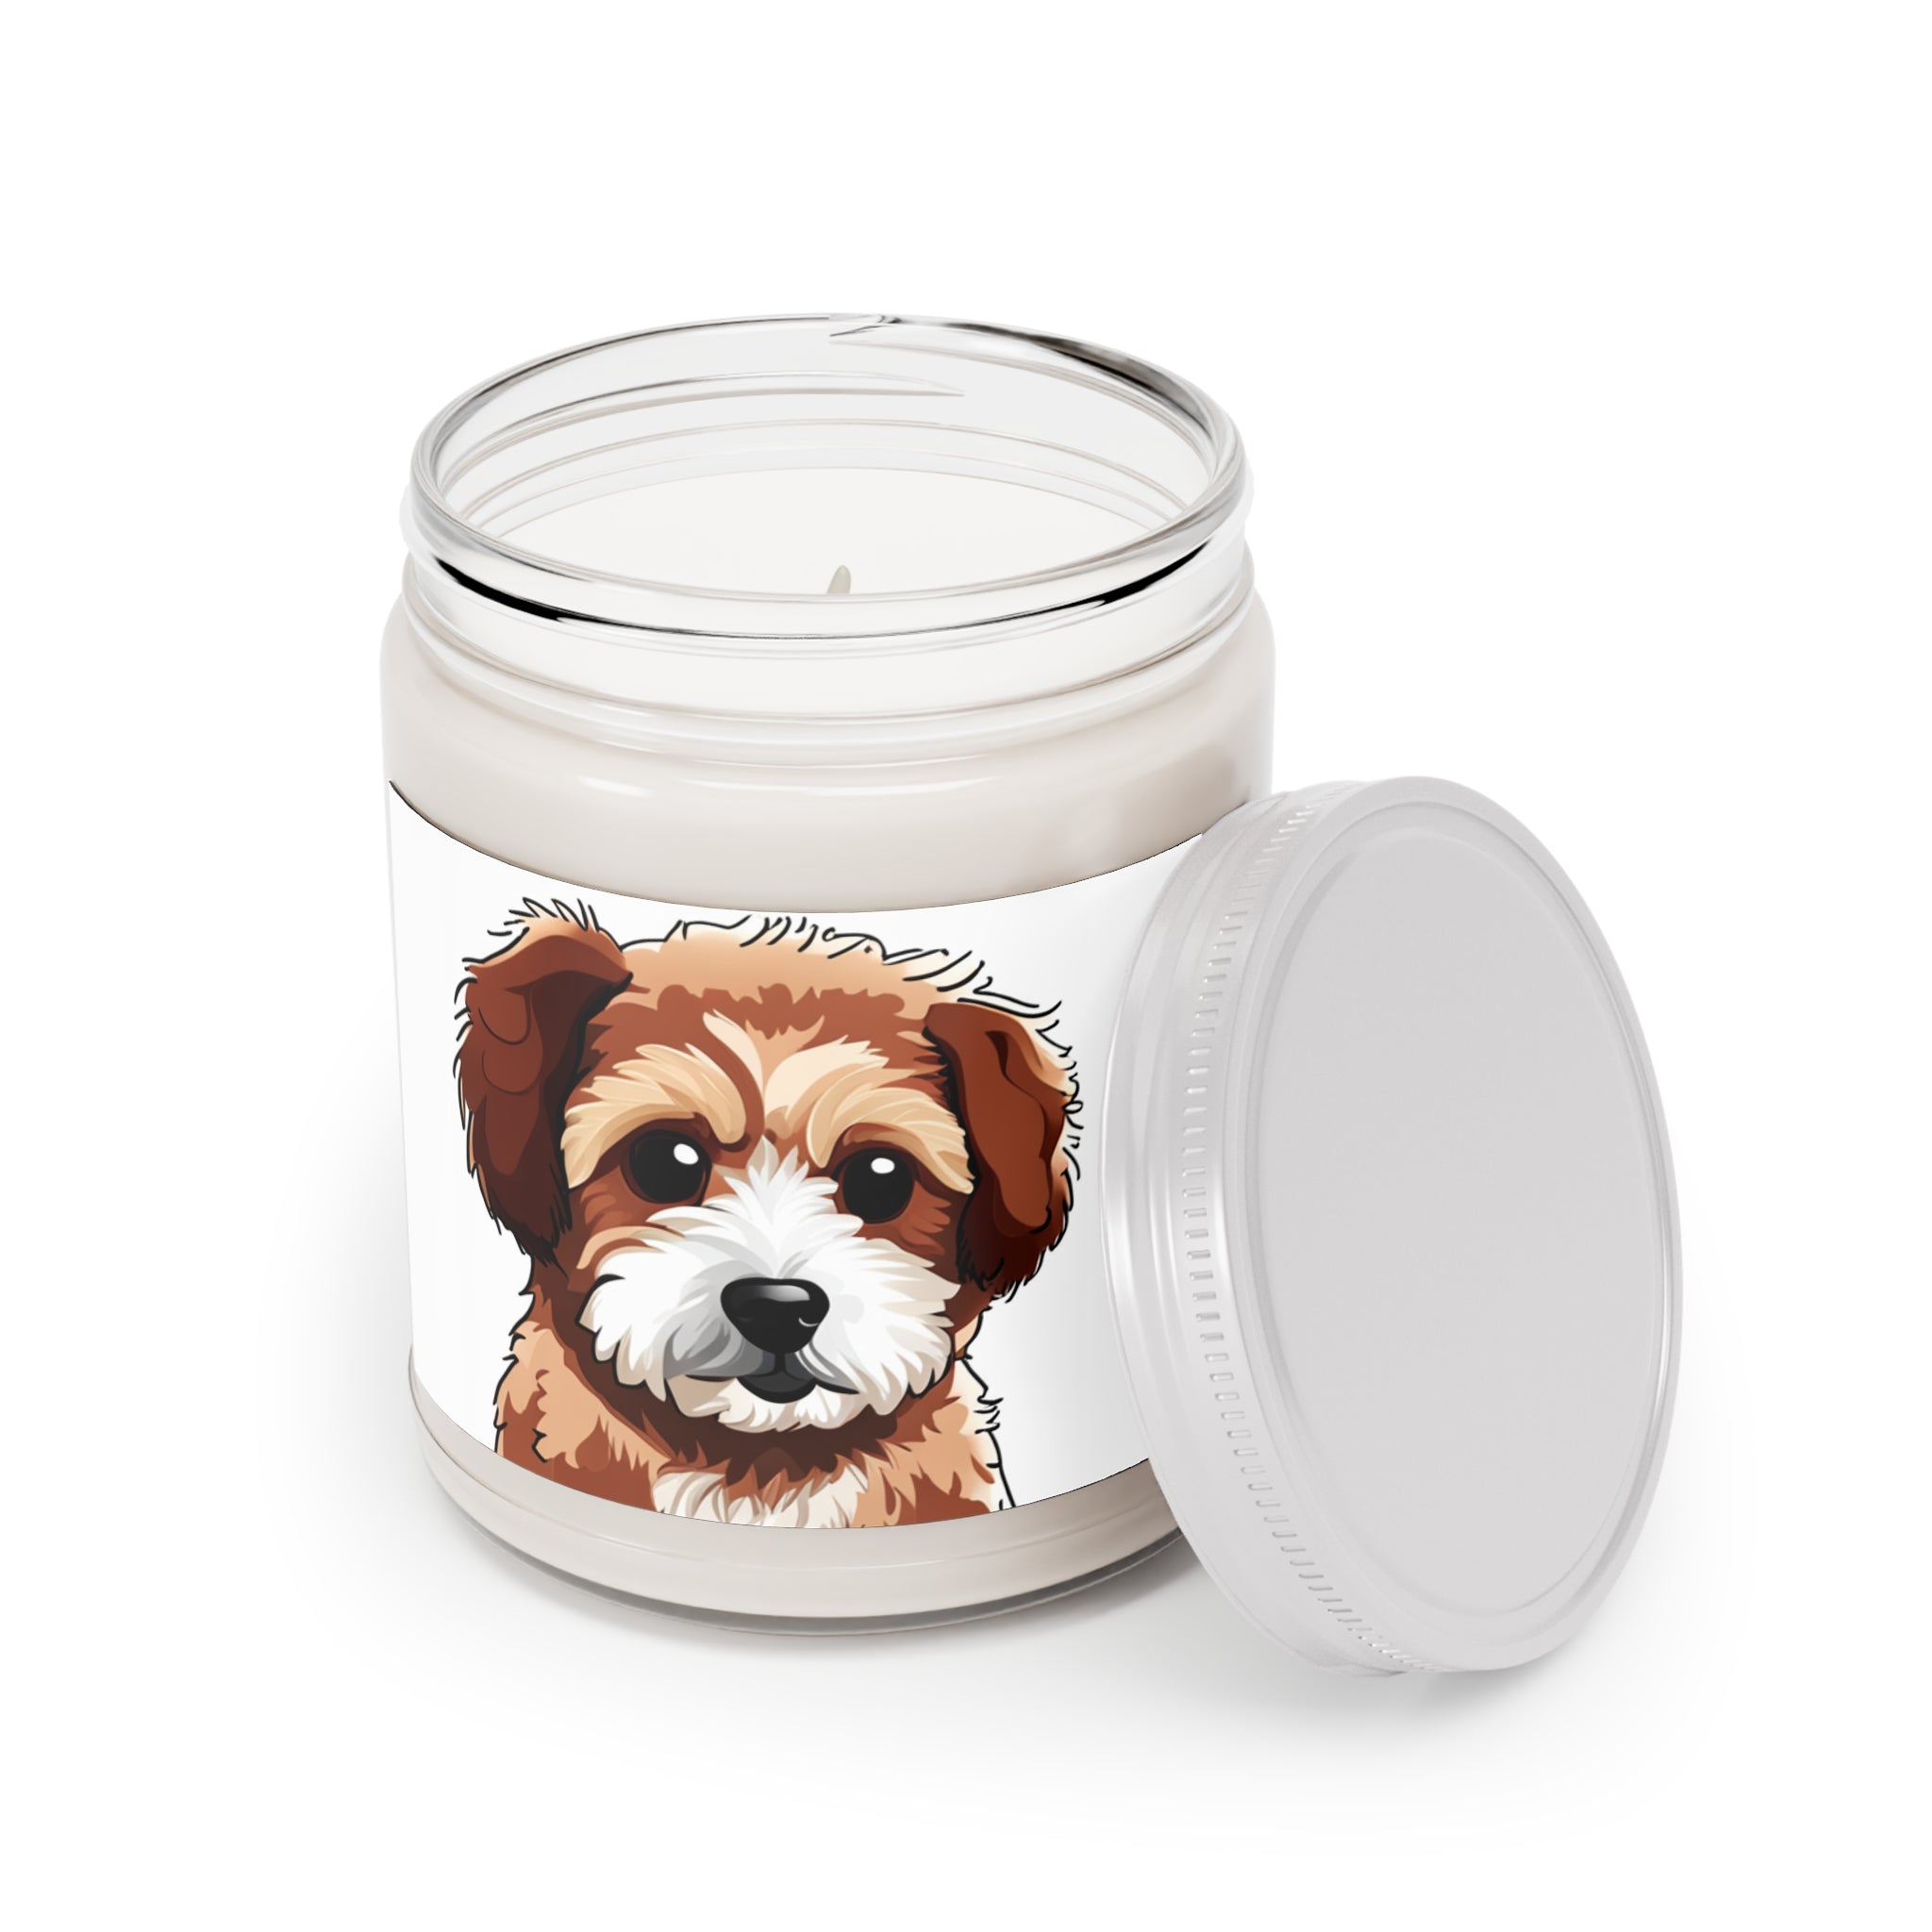 Cavoodle Themed Scented Candles, 255g